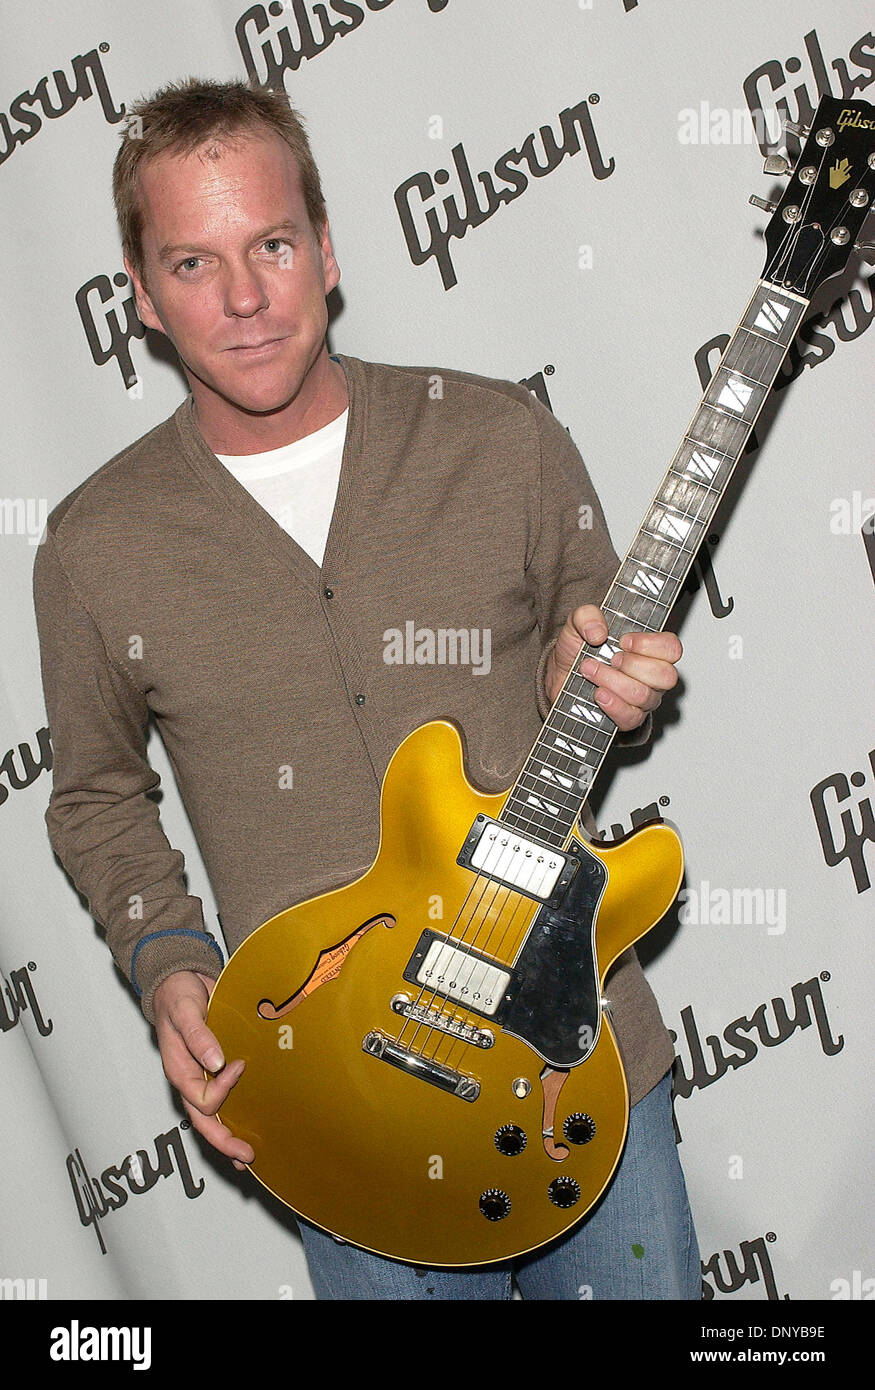 January 21, 2006; Anaheim, CA, USA; Actor/musician KIEFER SUTHERLAND at the  Gibson Guitar Room at The NAMM Show 2006 at the Anaheim Convention Center.  Mandatory Credit: Photo by Vaughn Youtz. (©) Copyright